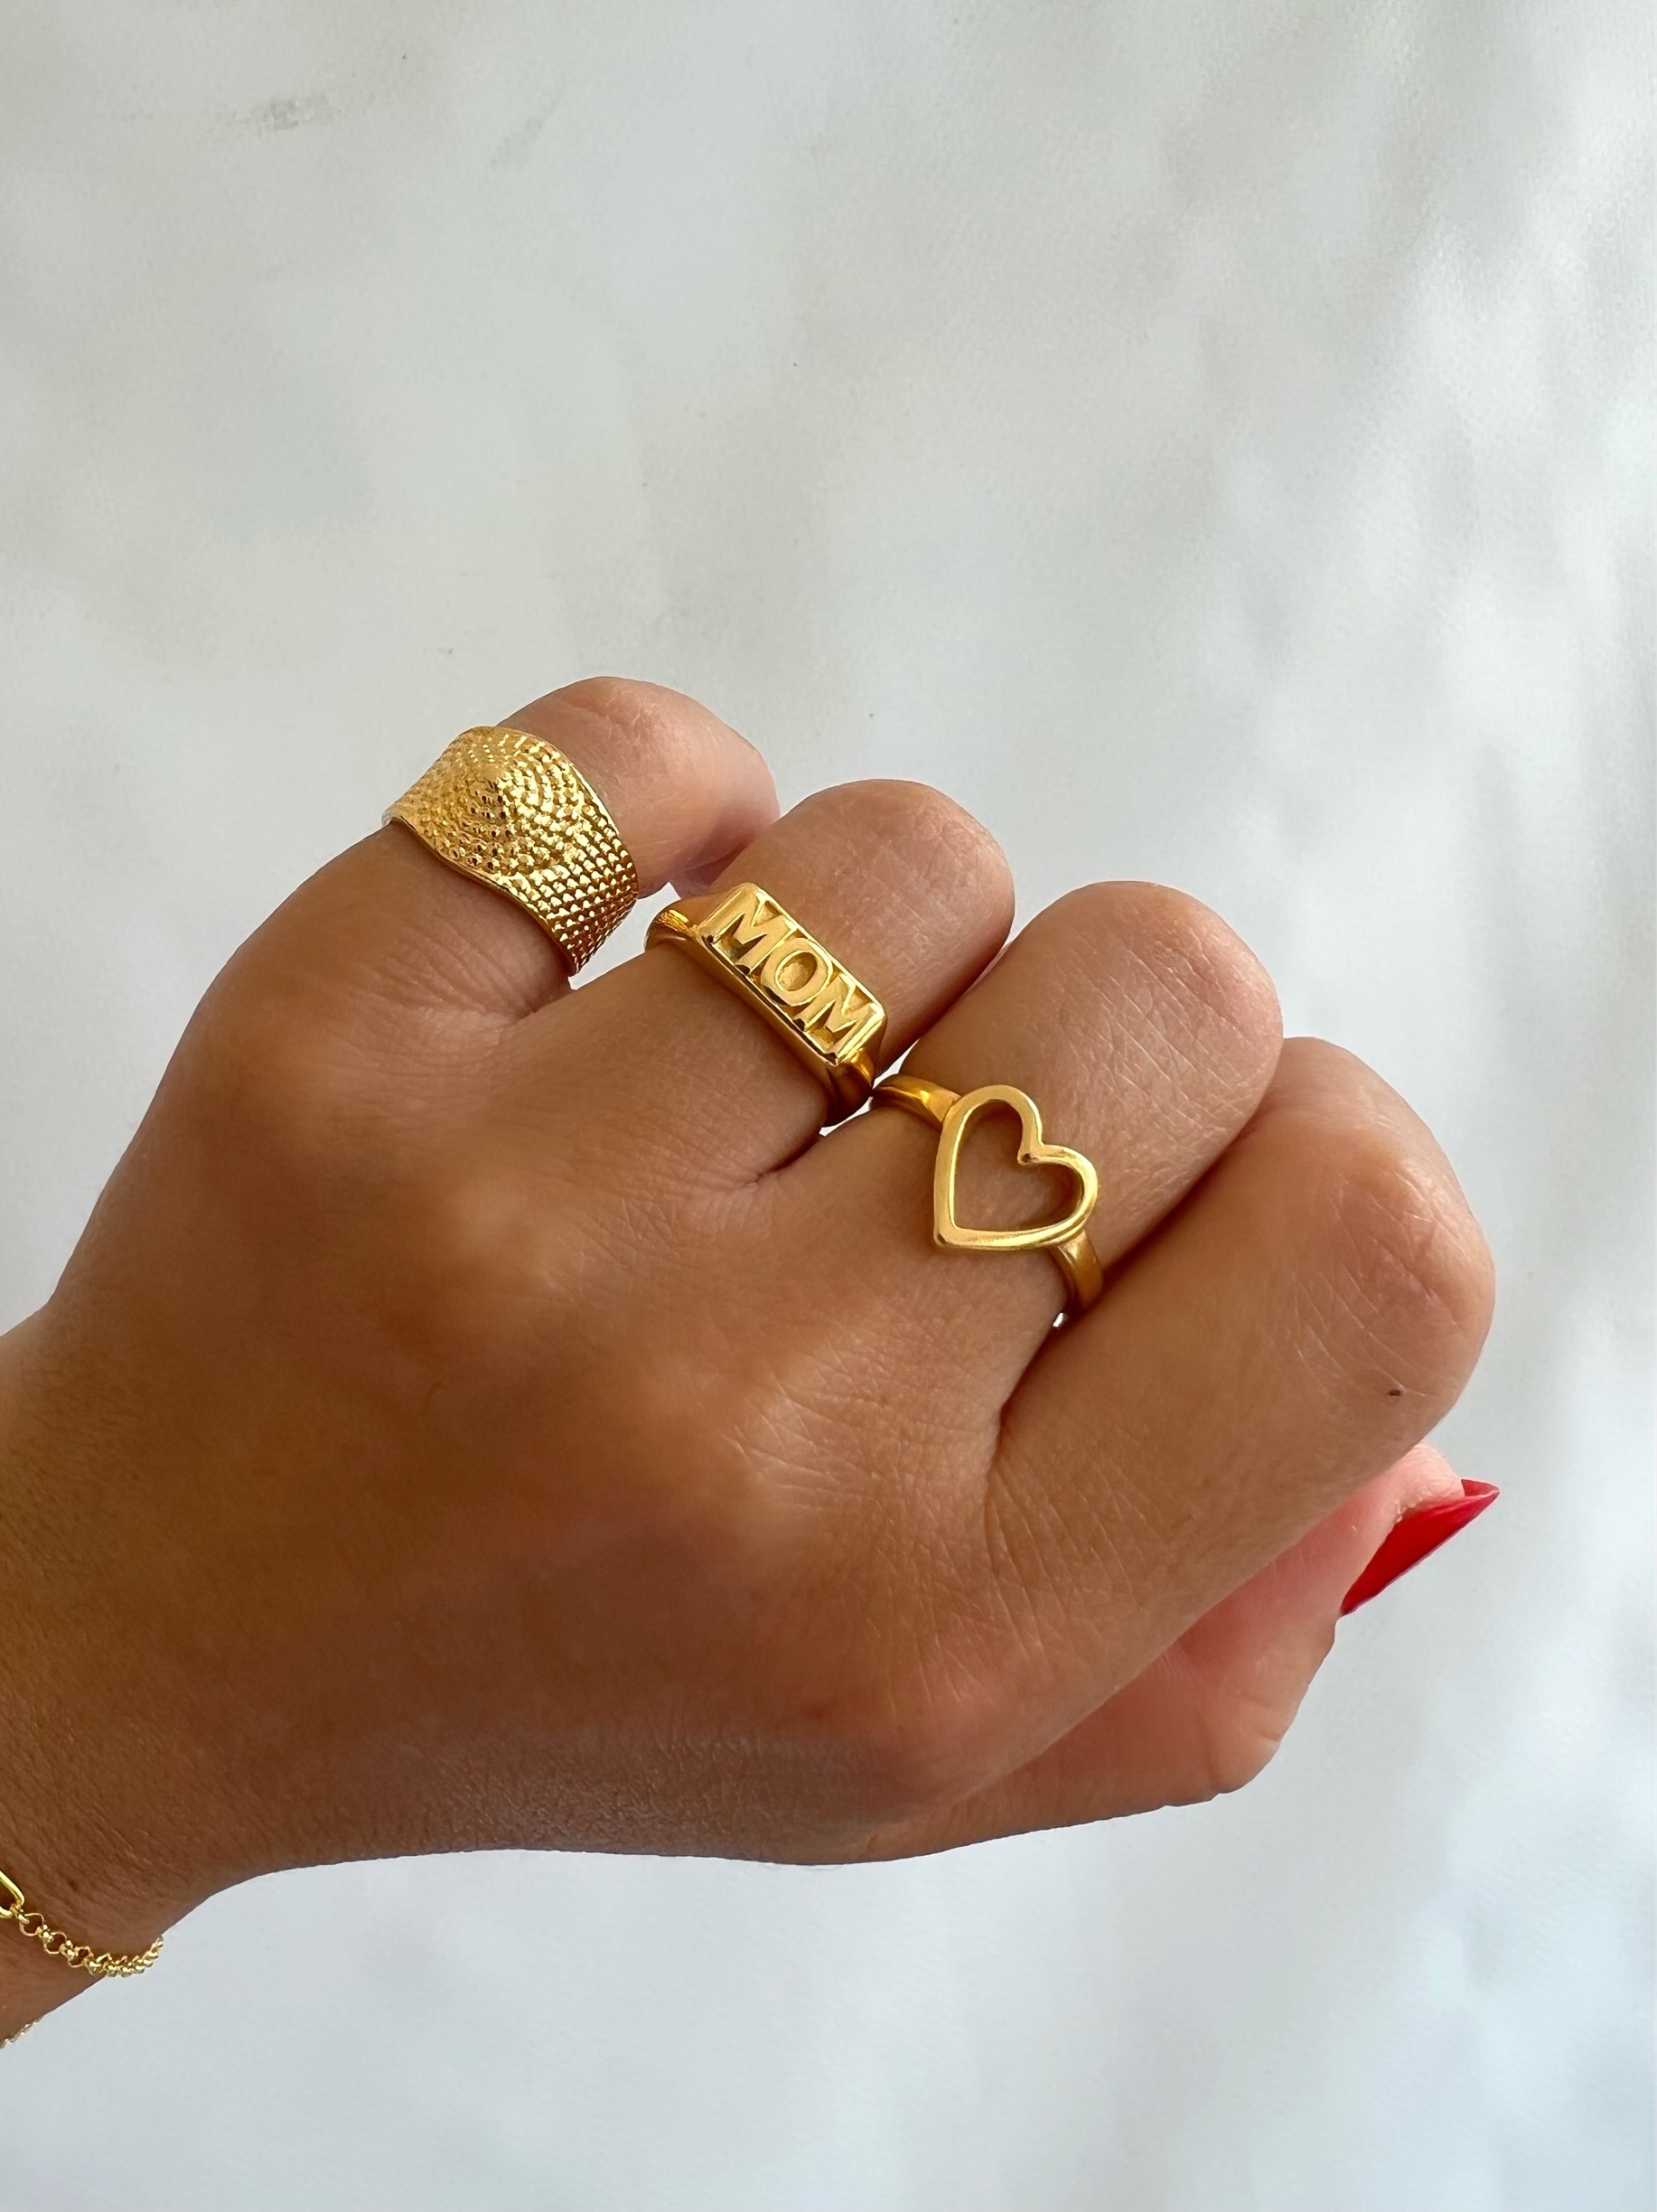 Minimalist Gemstone Stacking Rings & Petite Bands - Available Online -  Alysha Whitfield